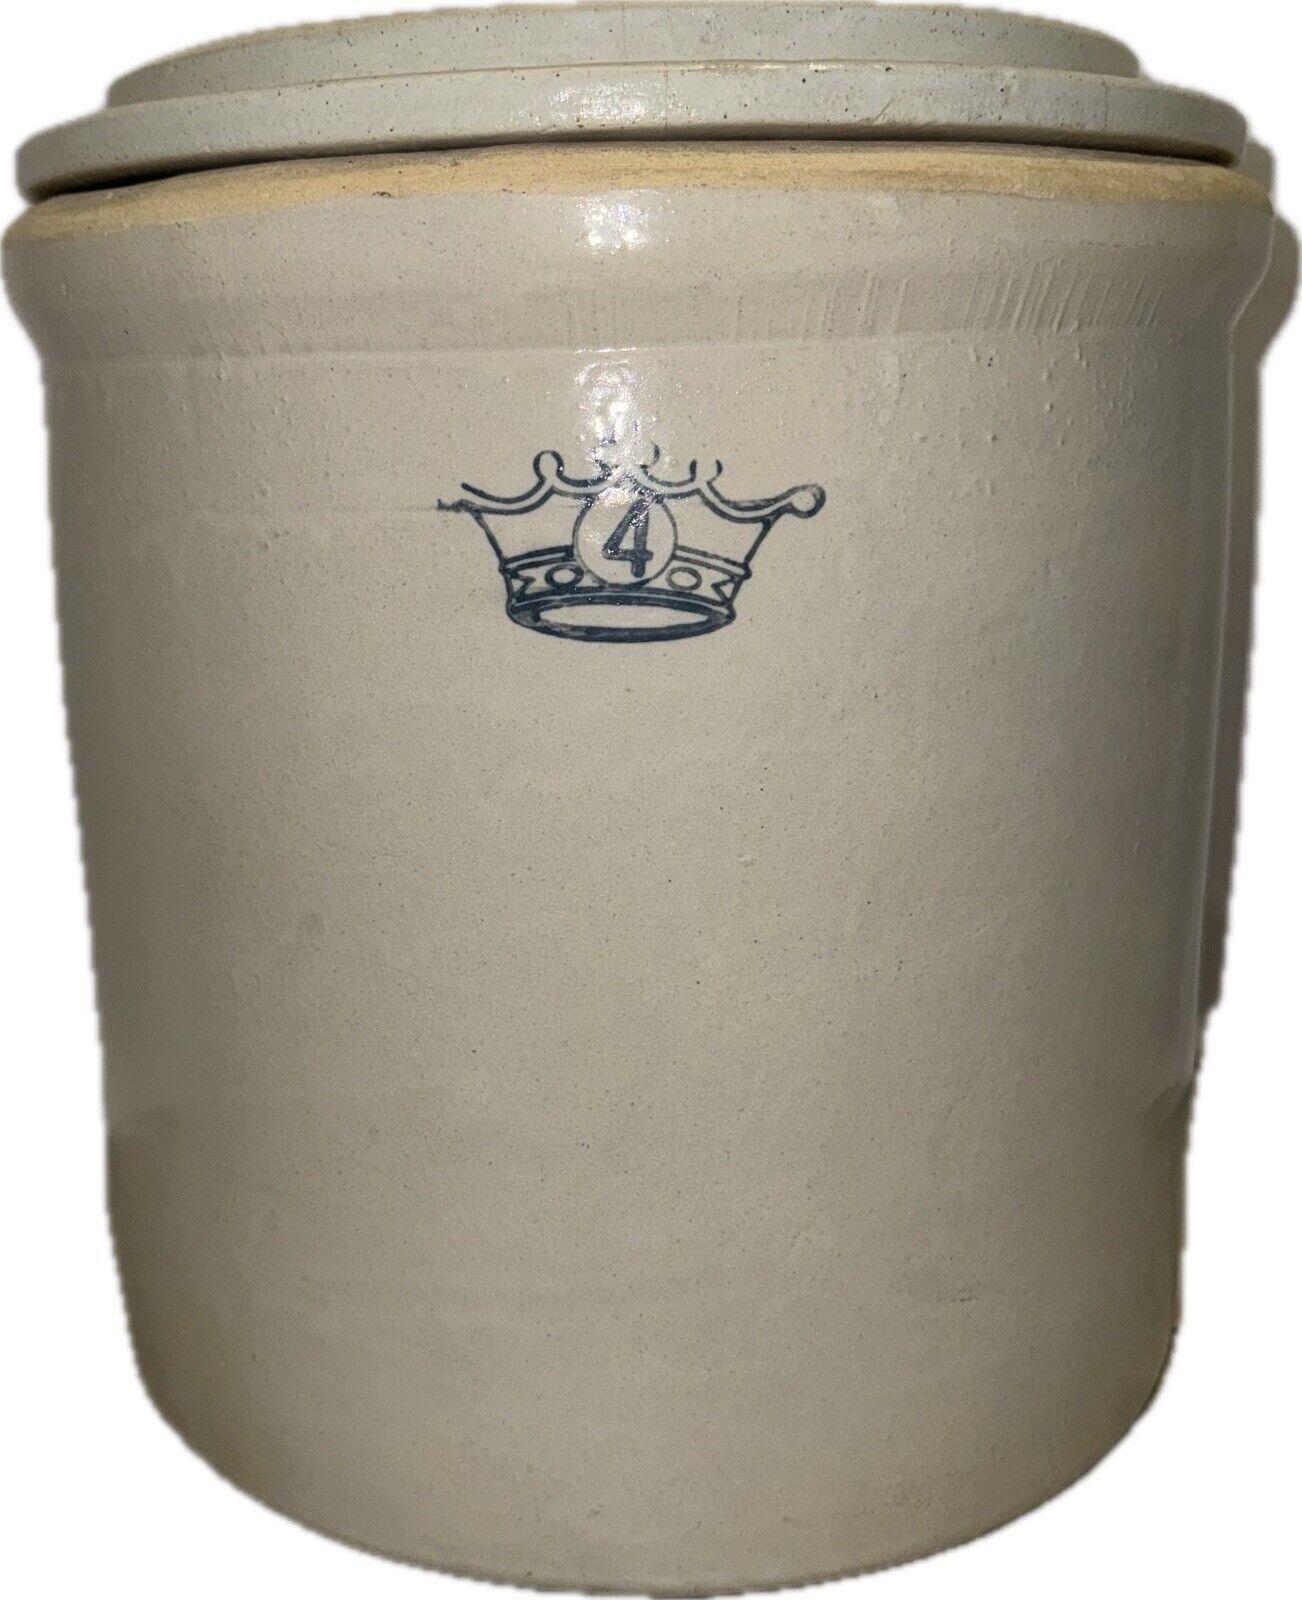 Antique Vintage Crown Ransbottom 4 Gallon Crock Stoneware Pottery With Lid